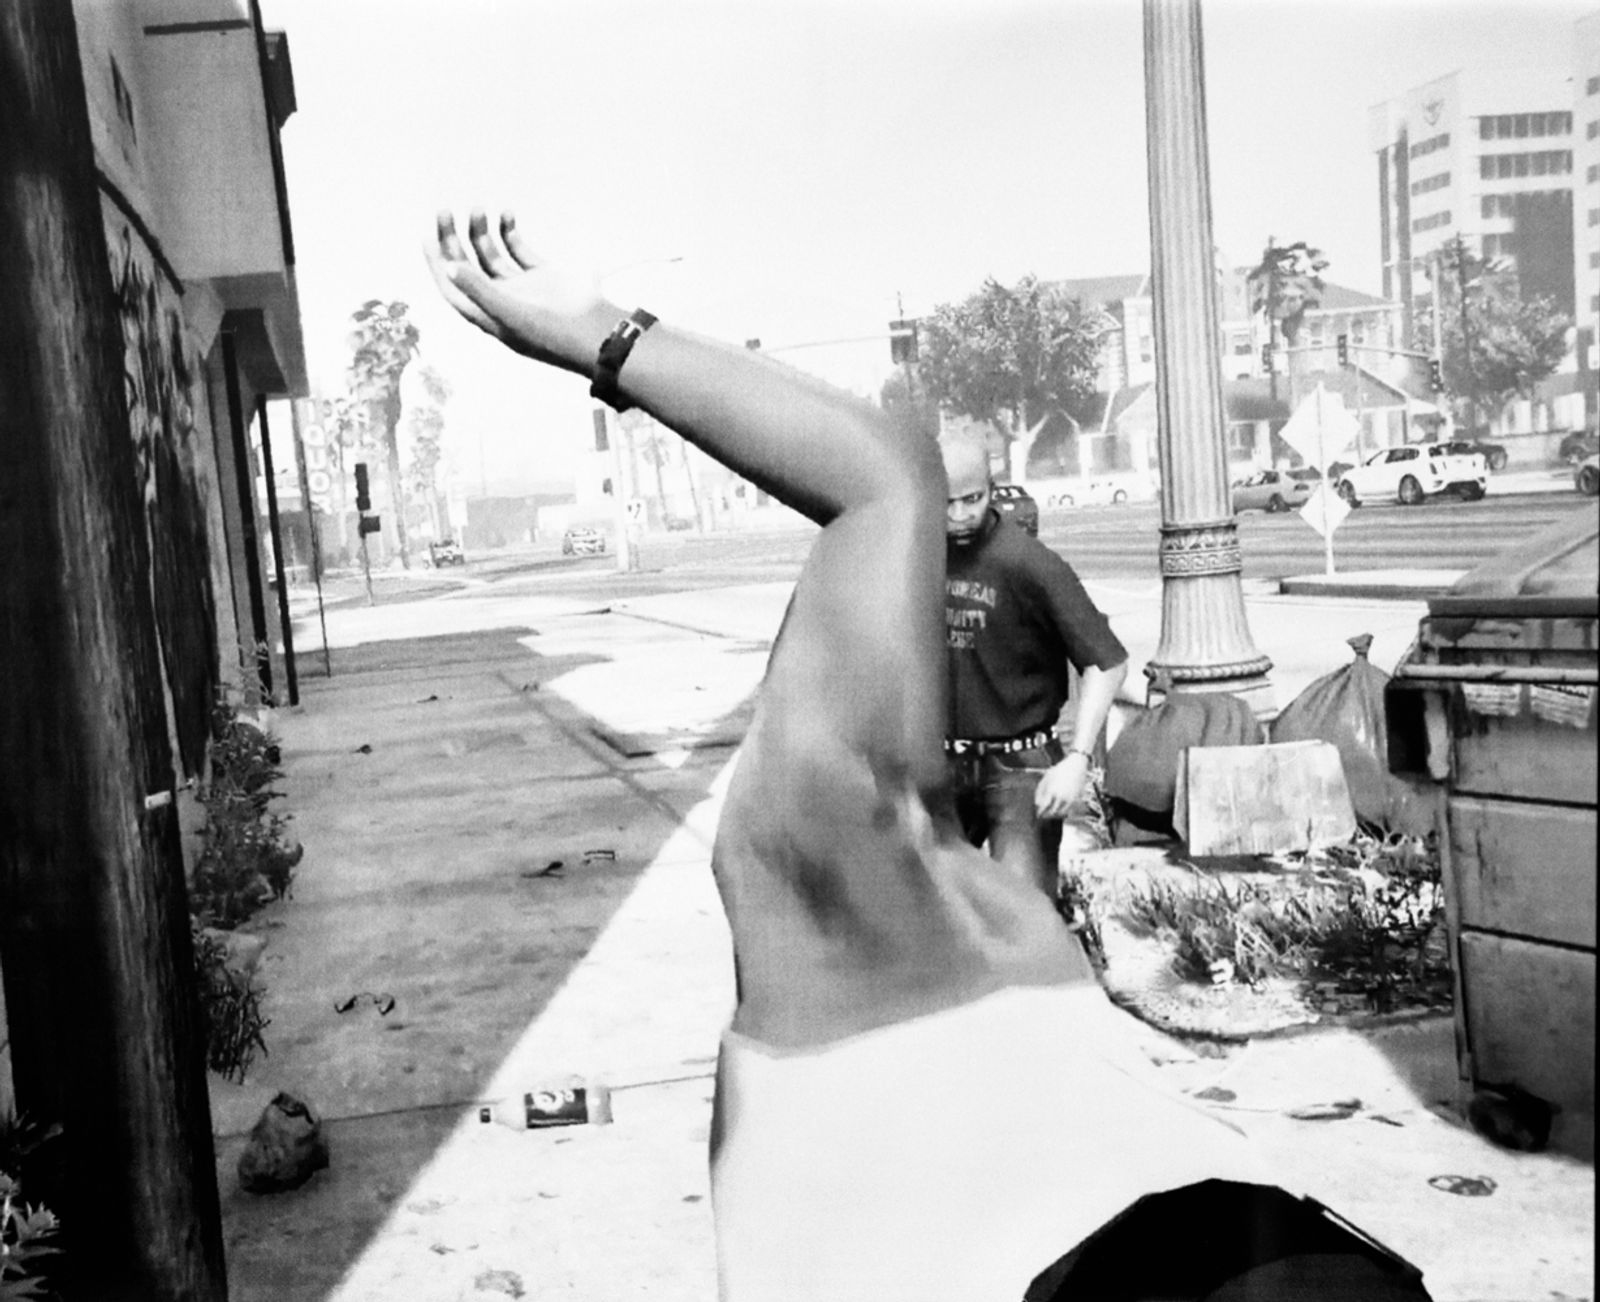 © Eleonora Paciullo - Image from the This is L.A. photography project